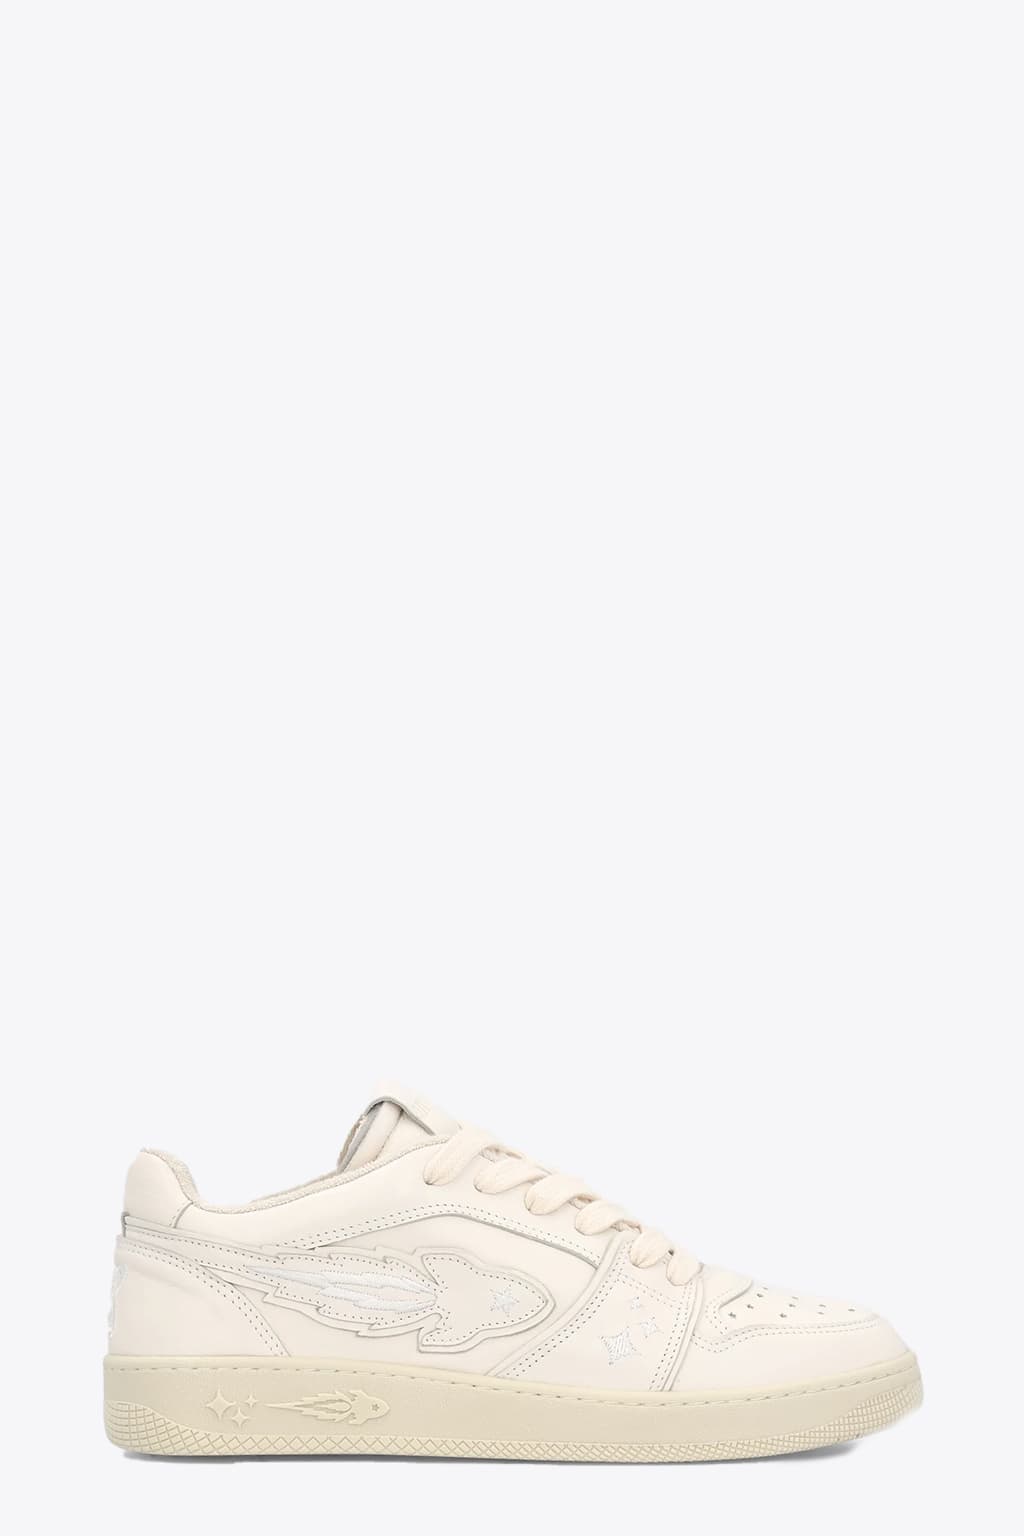 Enterprise Japan Rocket Low Off-white leather low sneakers with rocket